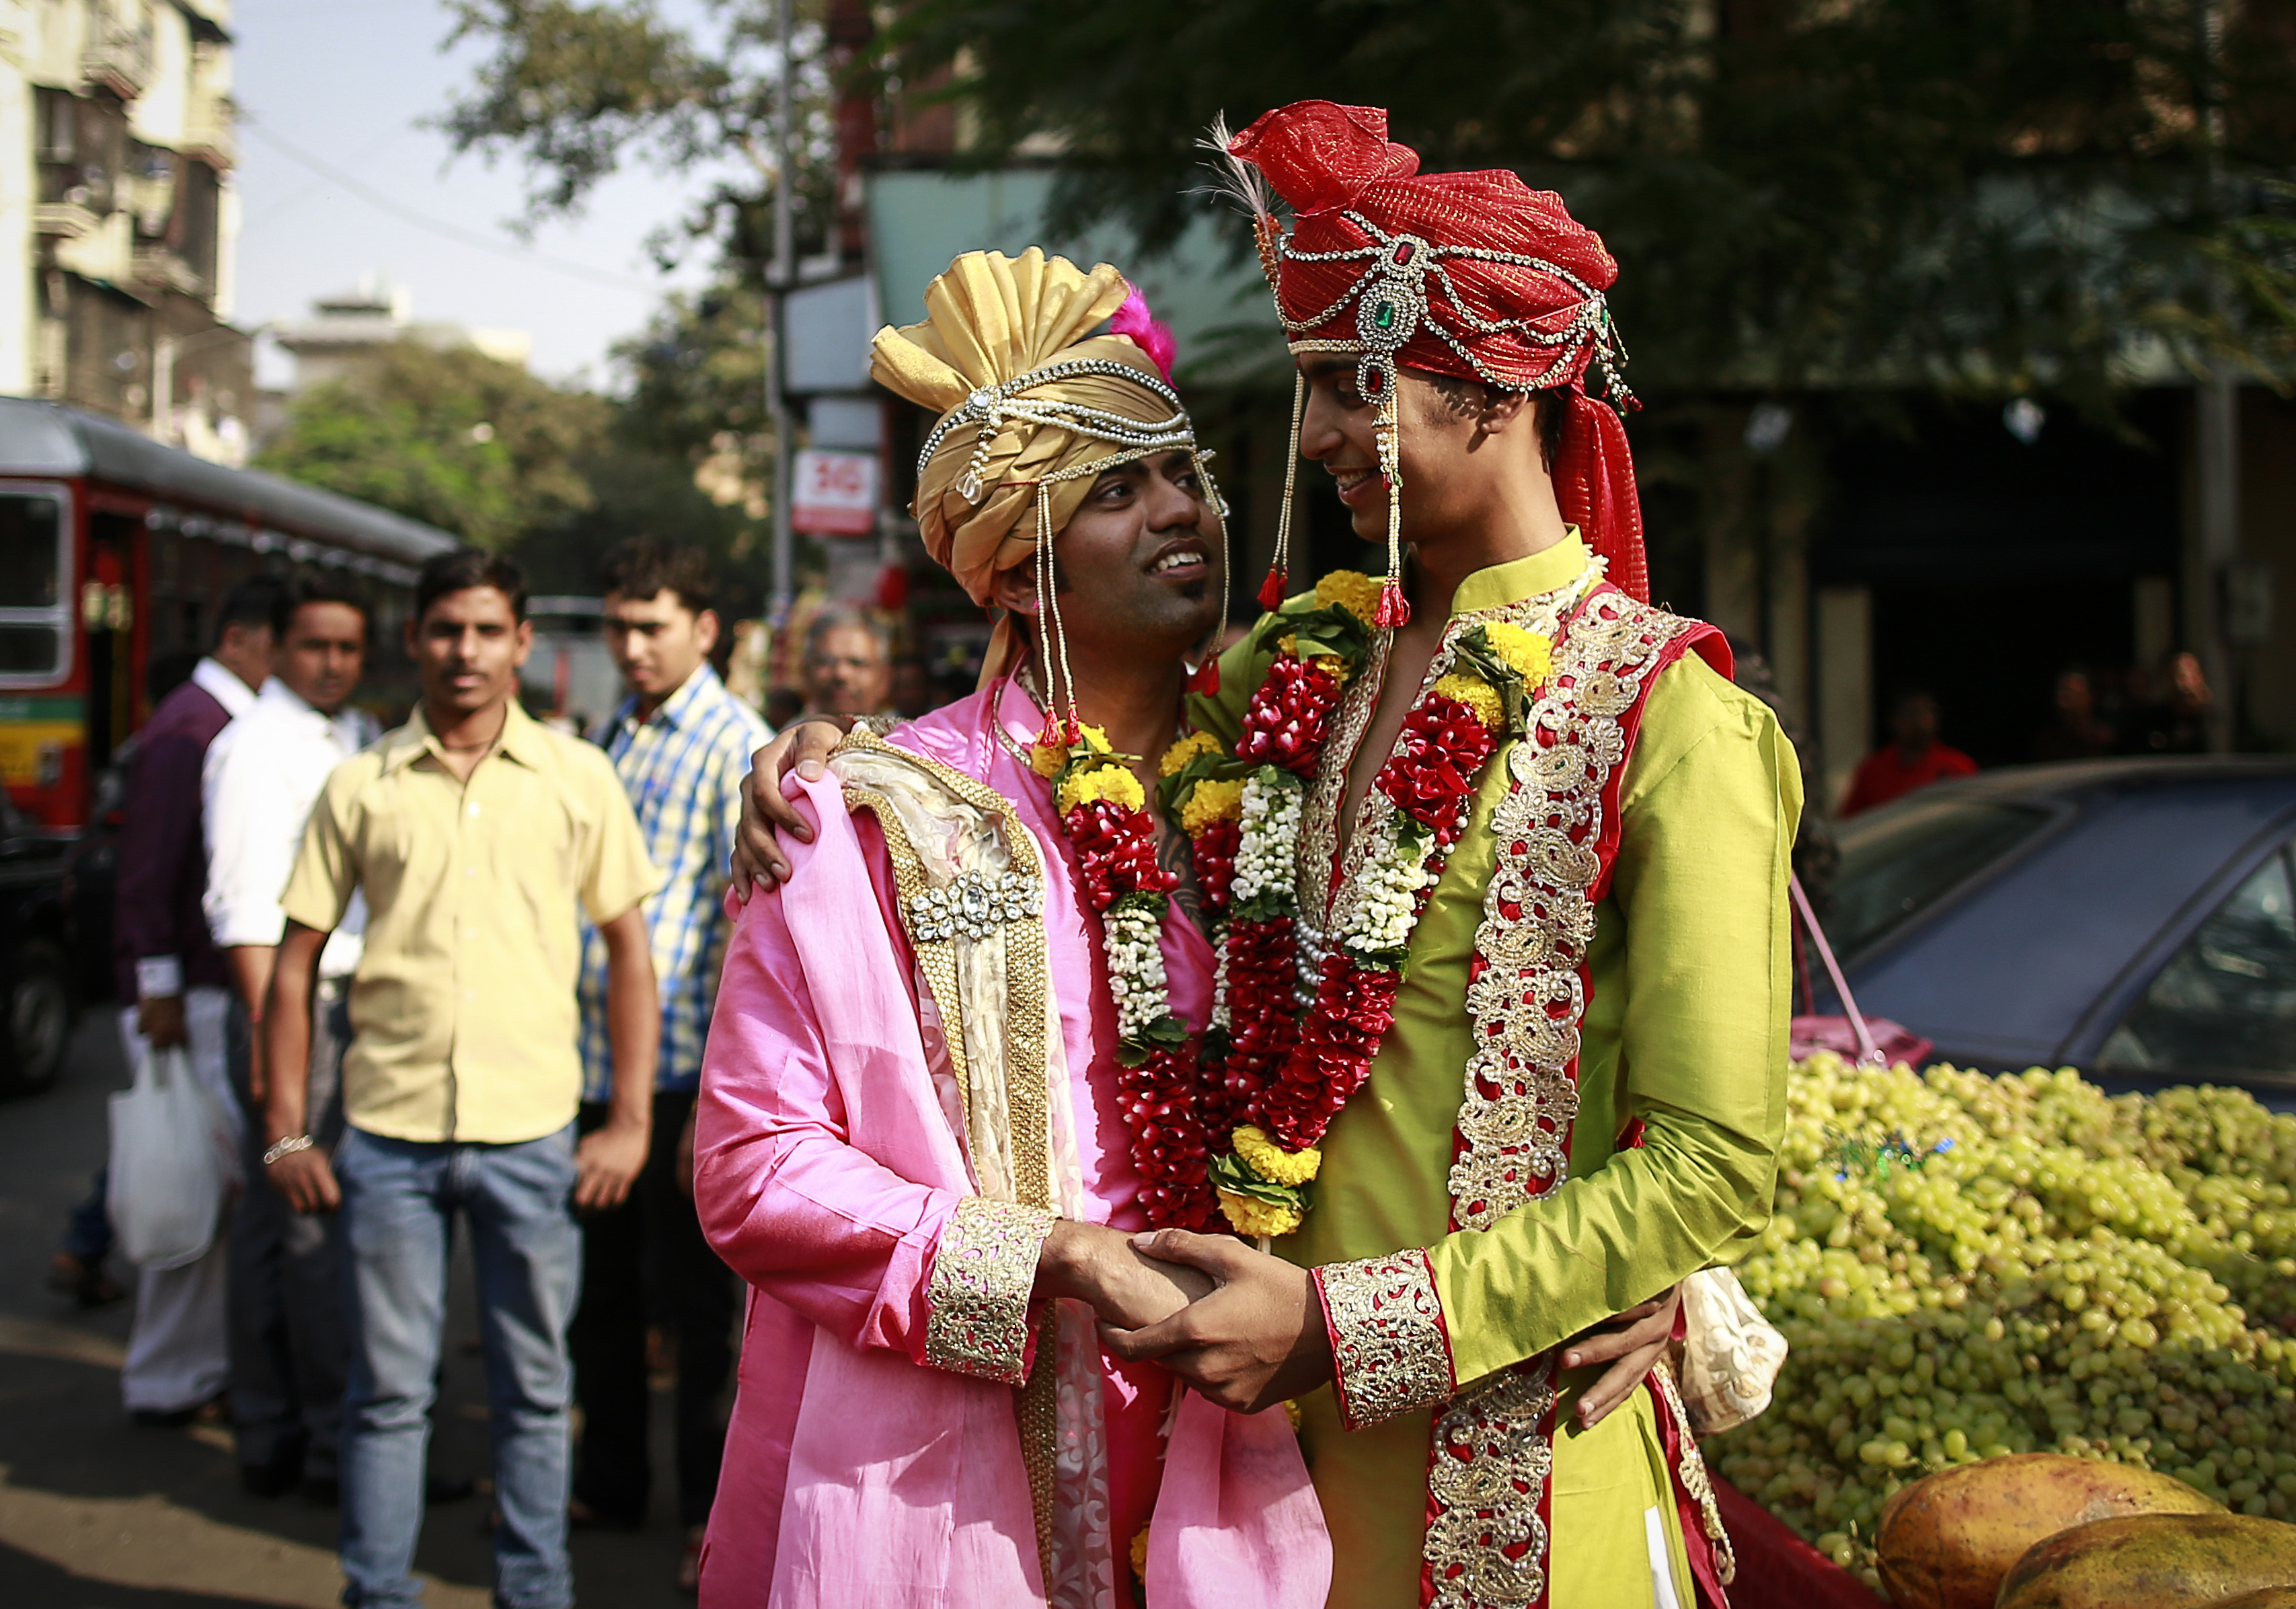 Parliament, not courts, best place to debate same-sex marriage, India minister says Reuters image picture